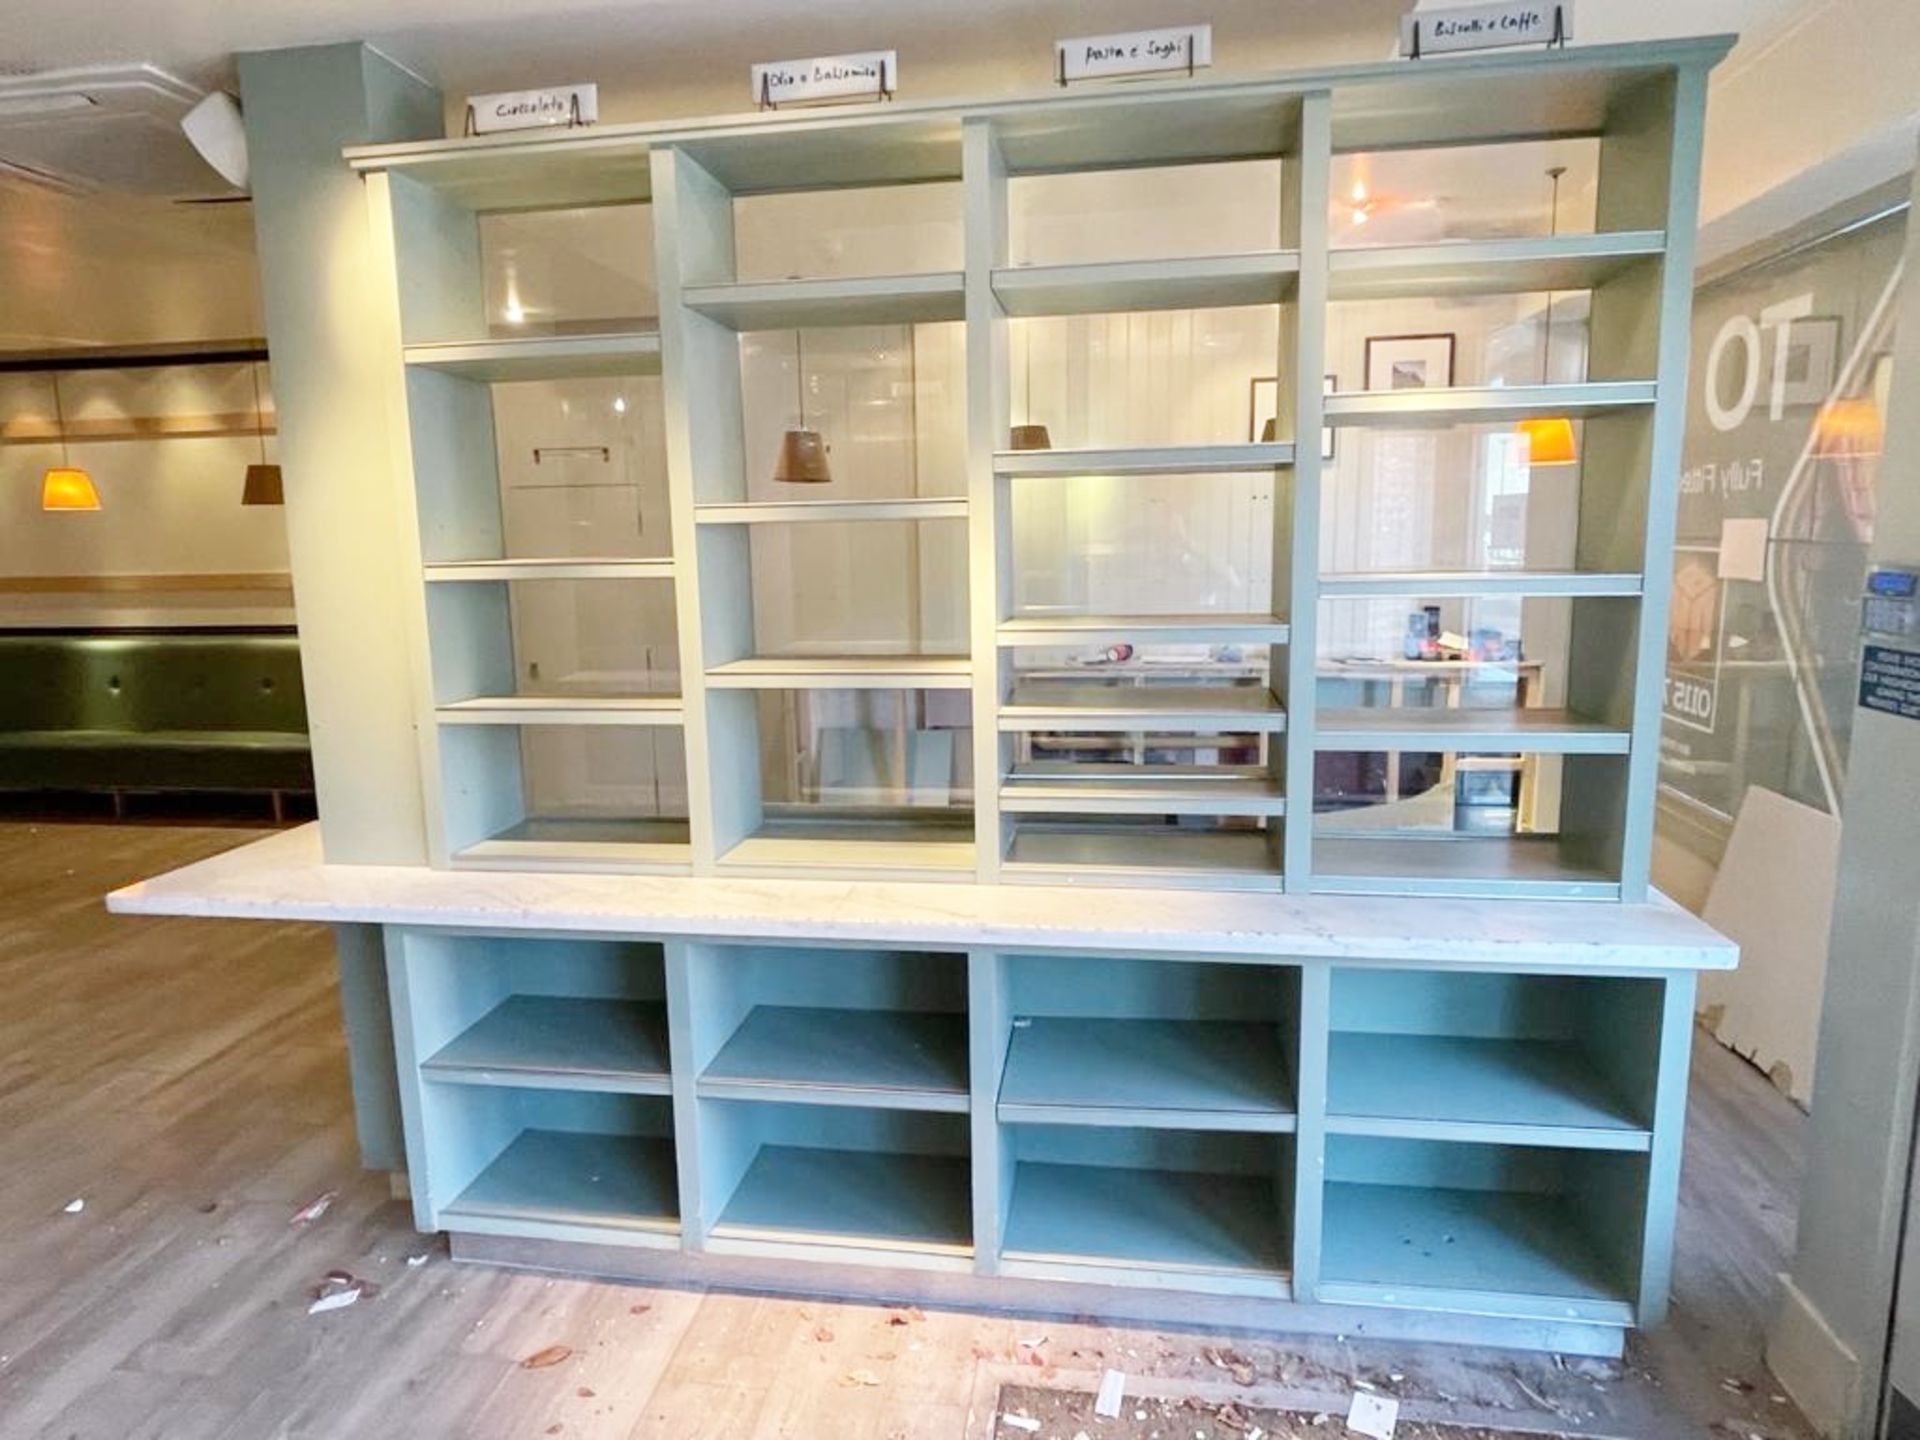 1 x Bespoke Display Island / Partition With Display Shelves, Olive Green Finish, Marble Worktop